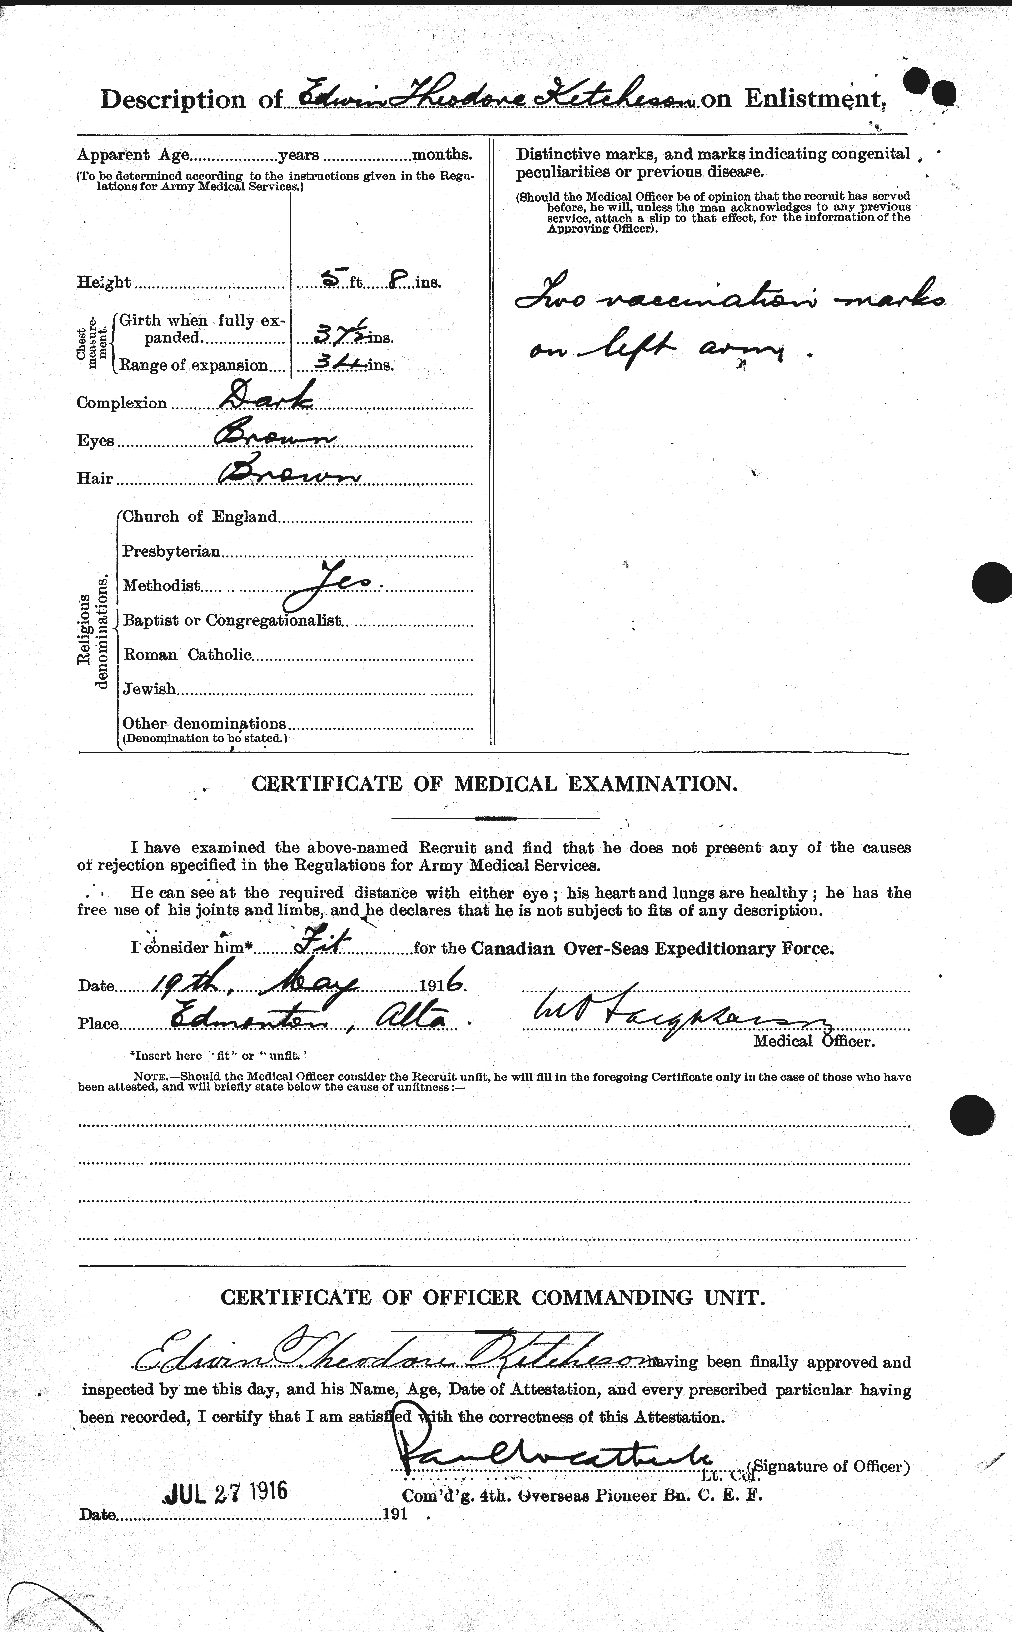 Personnel Records of the First World War - CEF 434726b